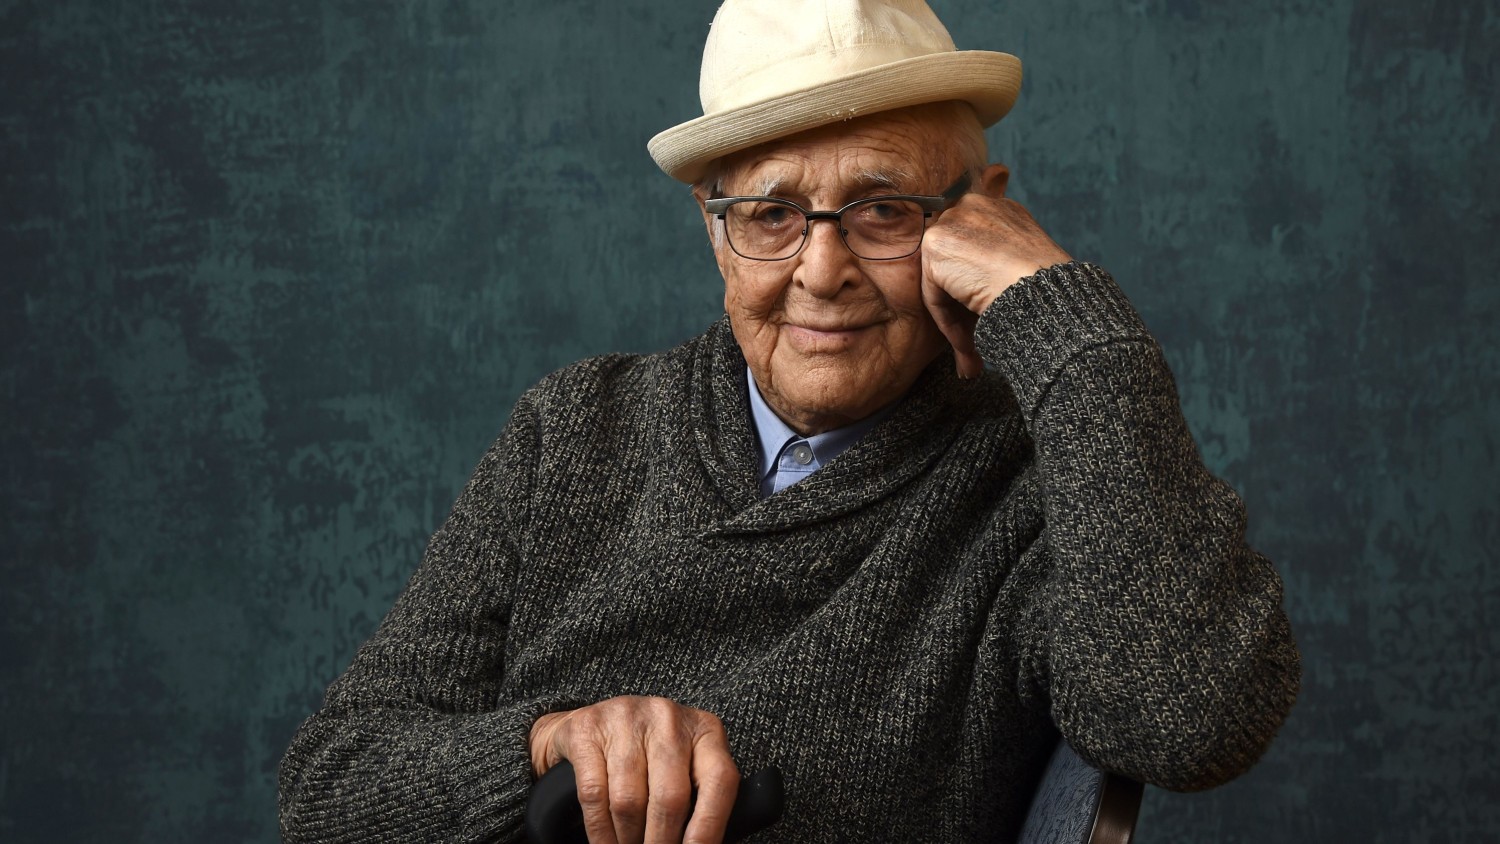 Norman Lear, iconic TV sitcom and movie producer, dies at 101